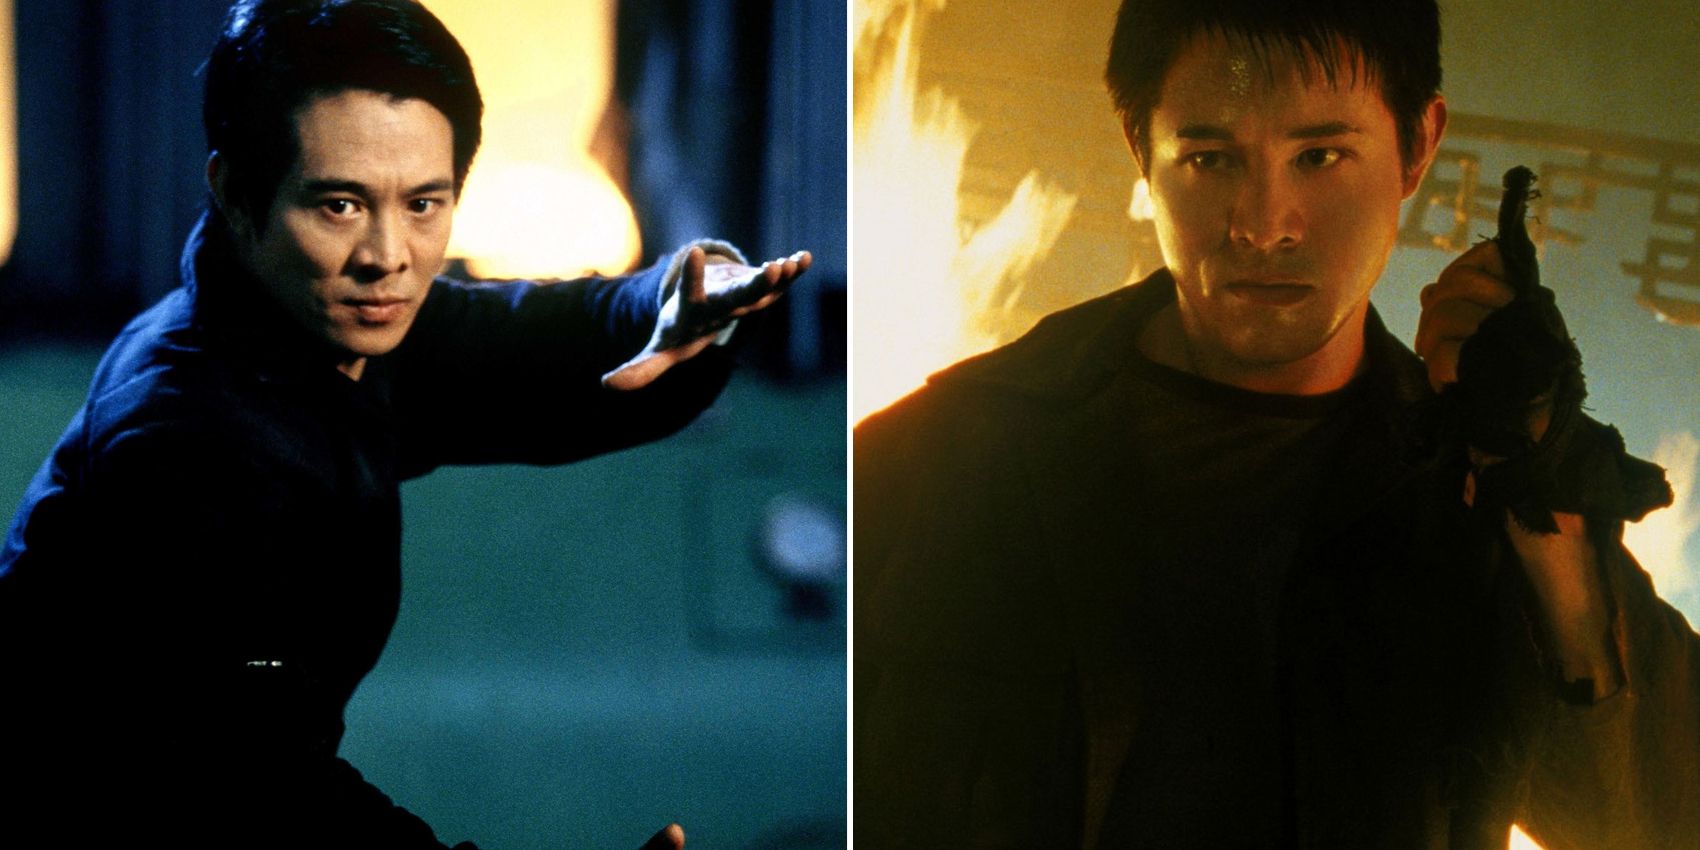 Jet Li in The One and Romeo Must Die